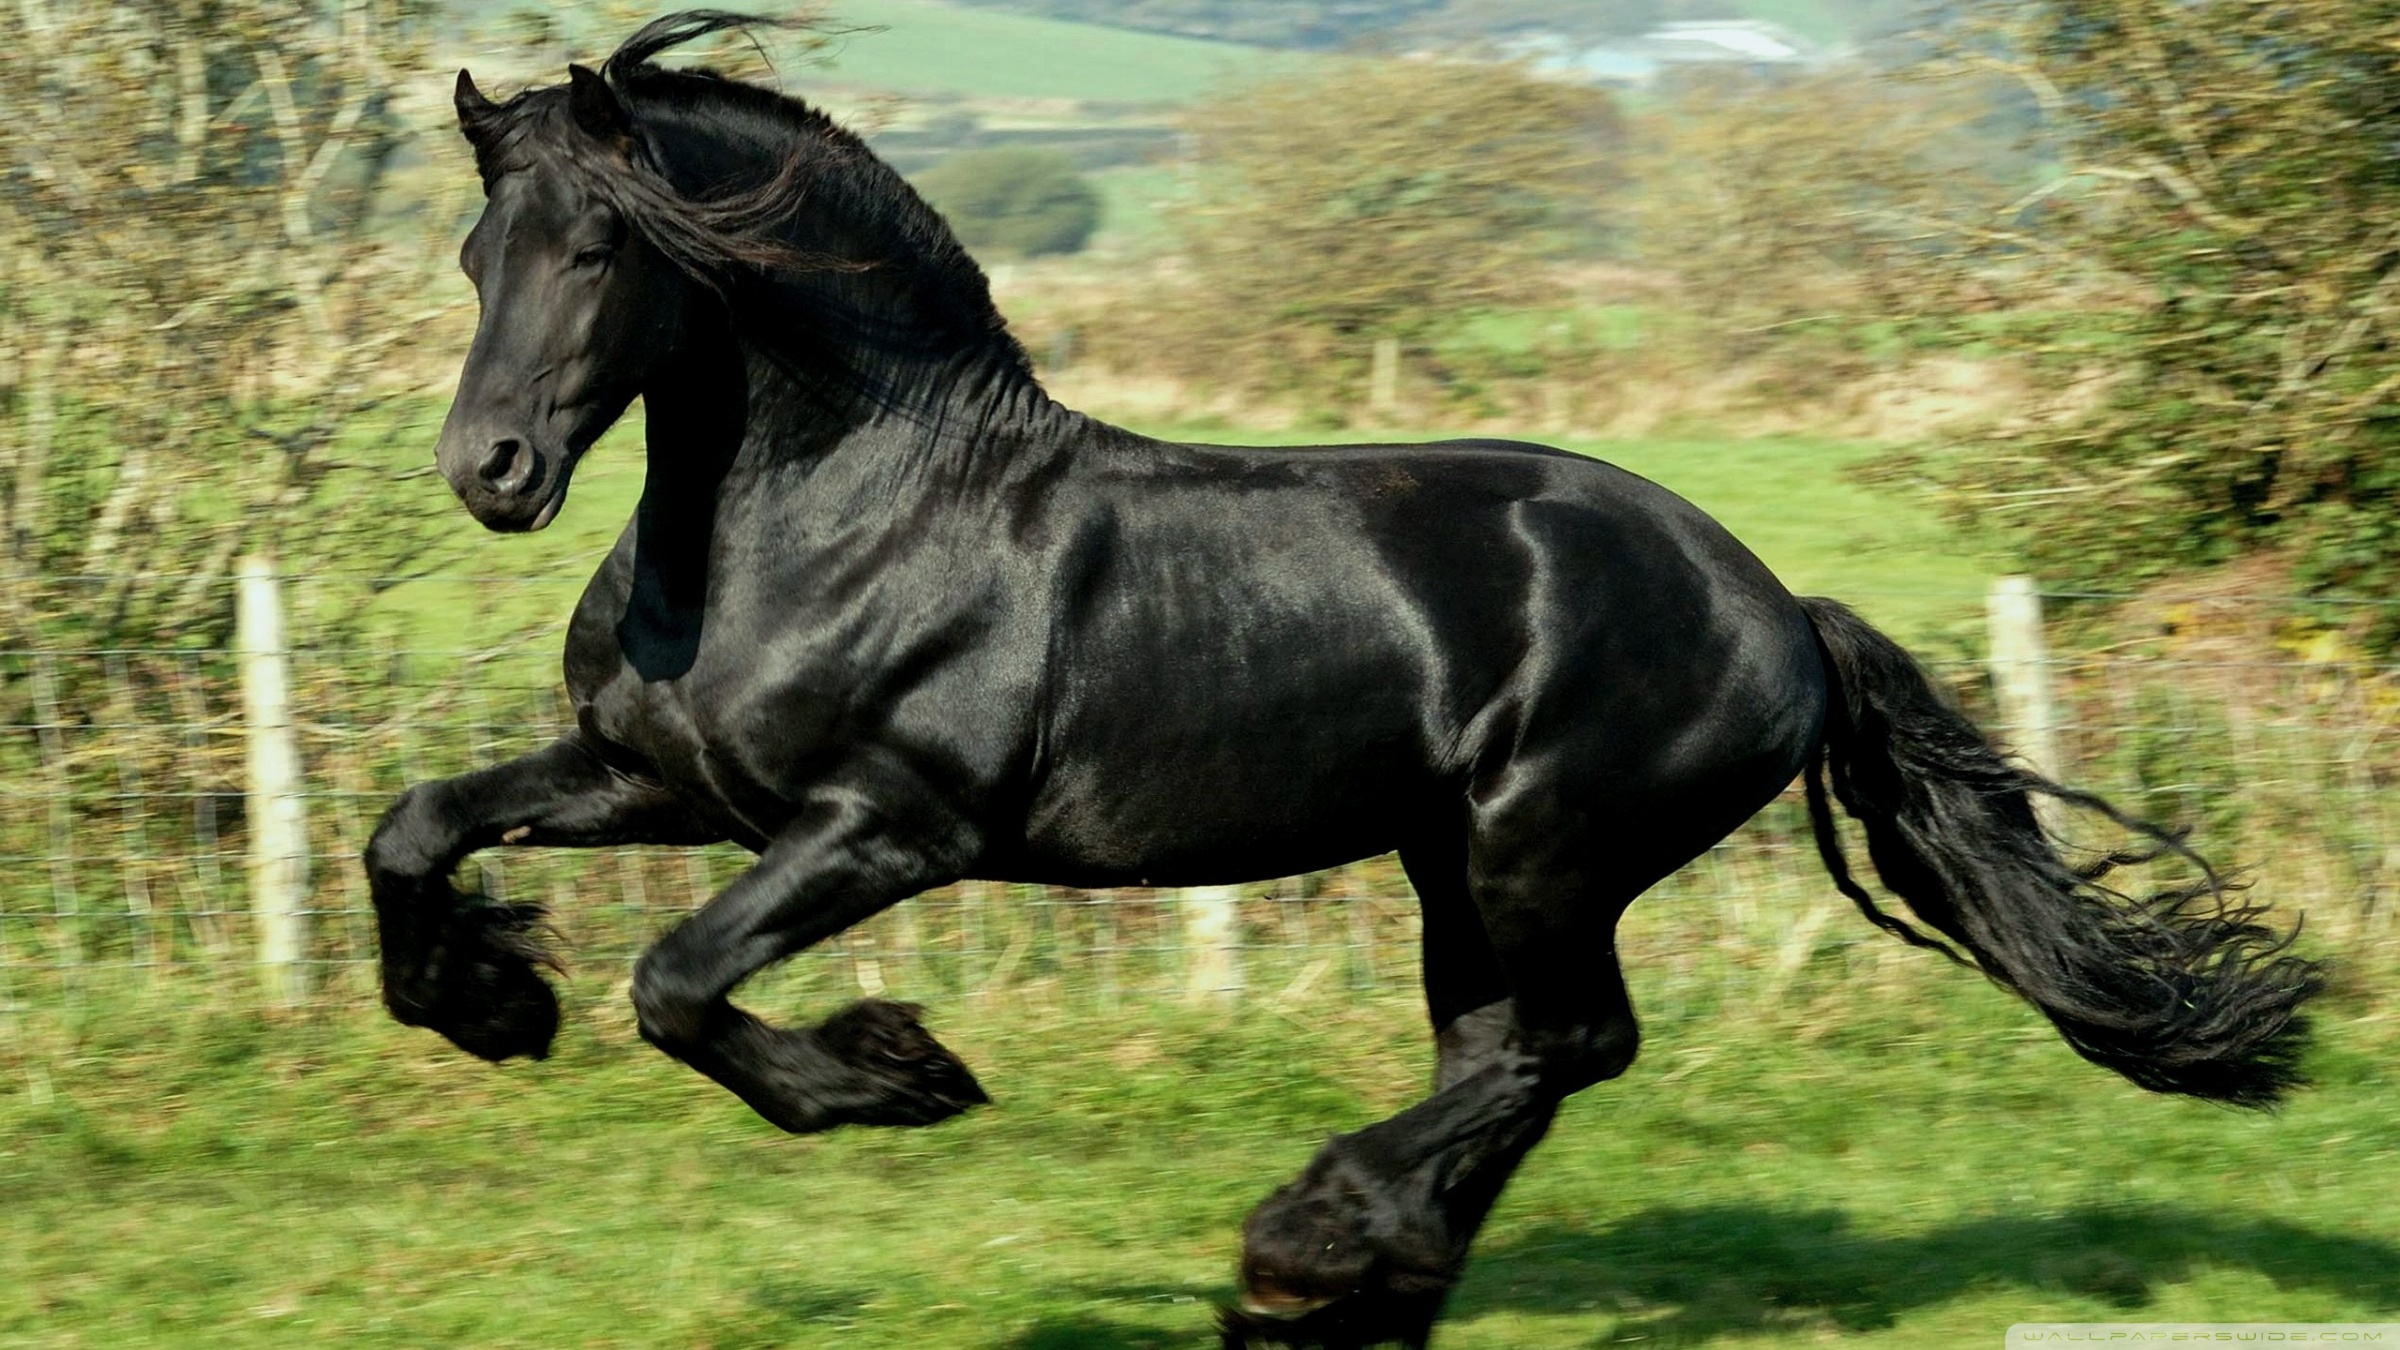 Black horse HD wallpapers